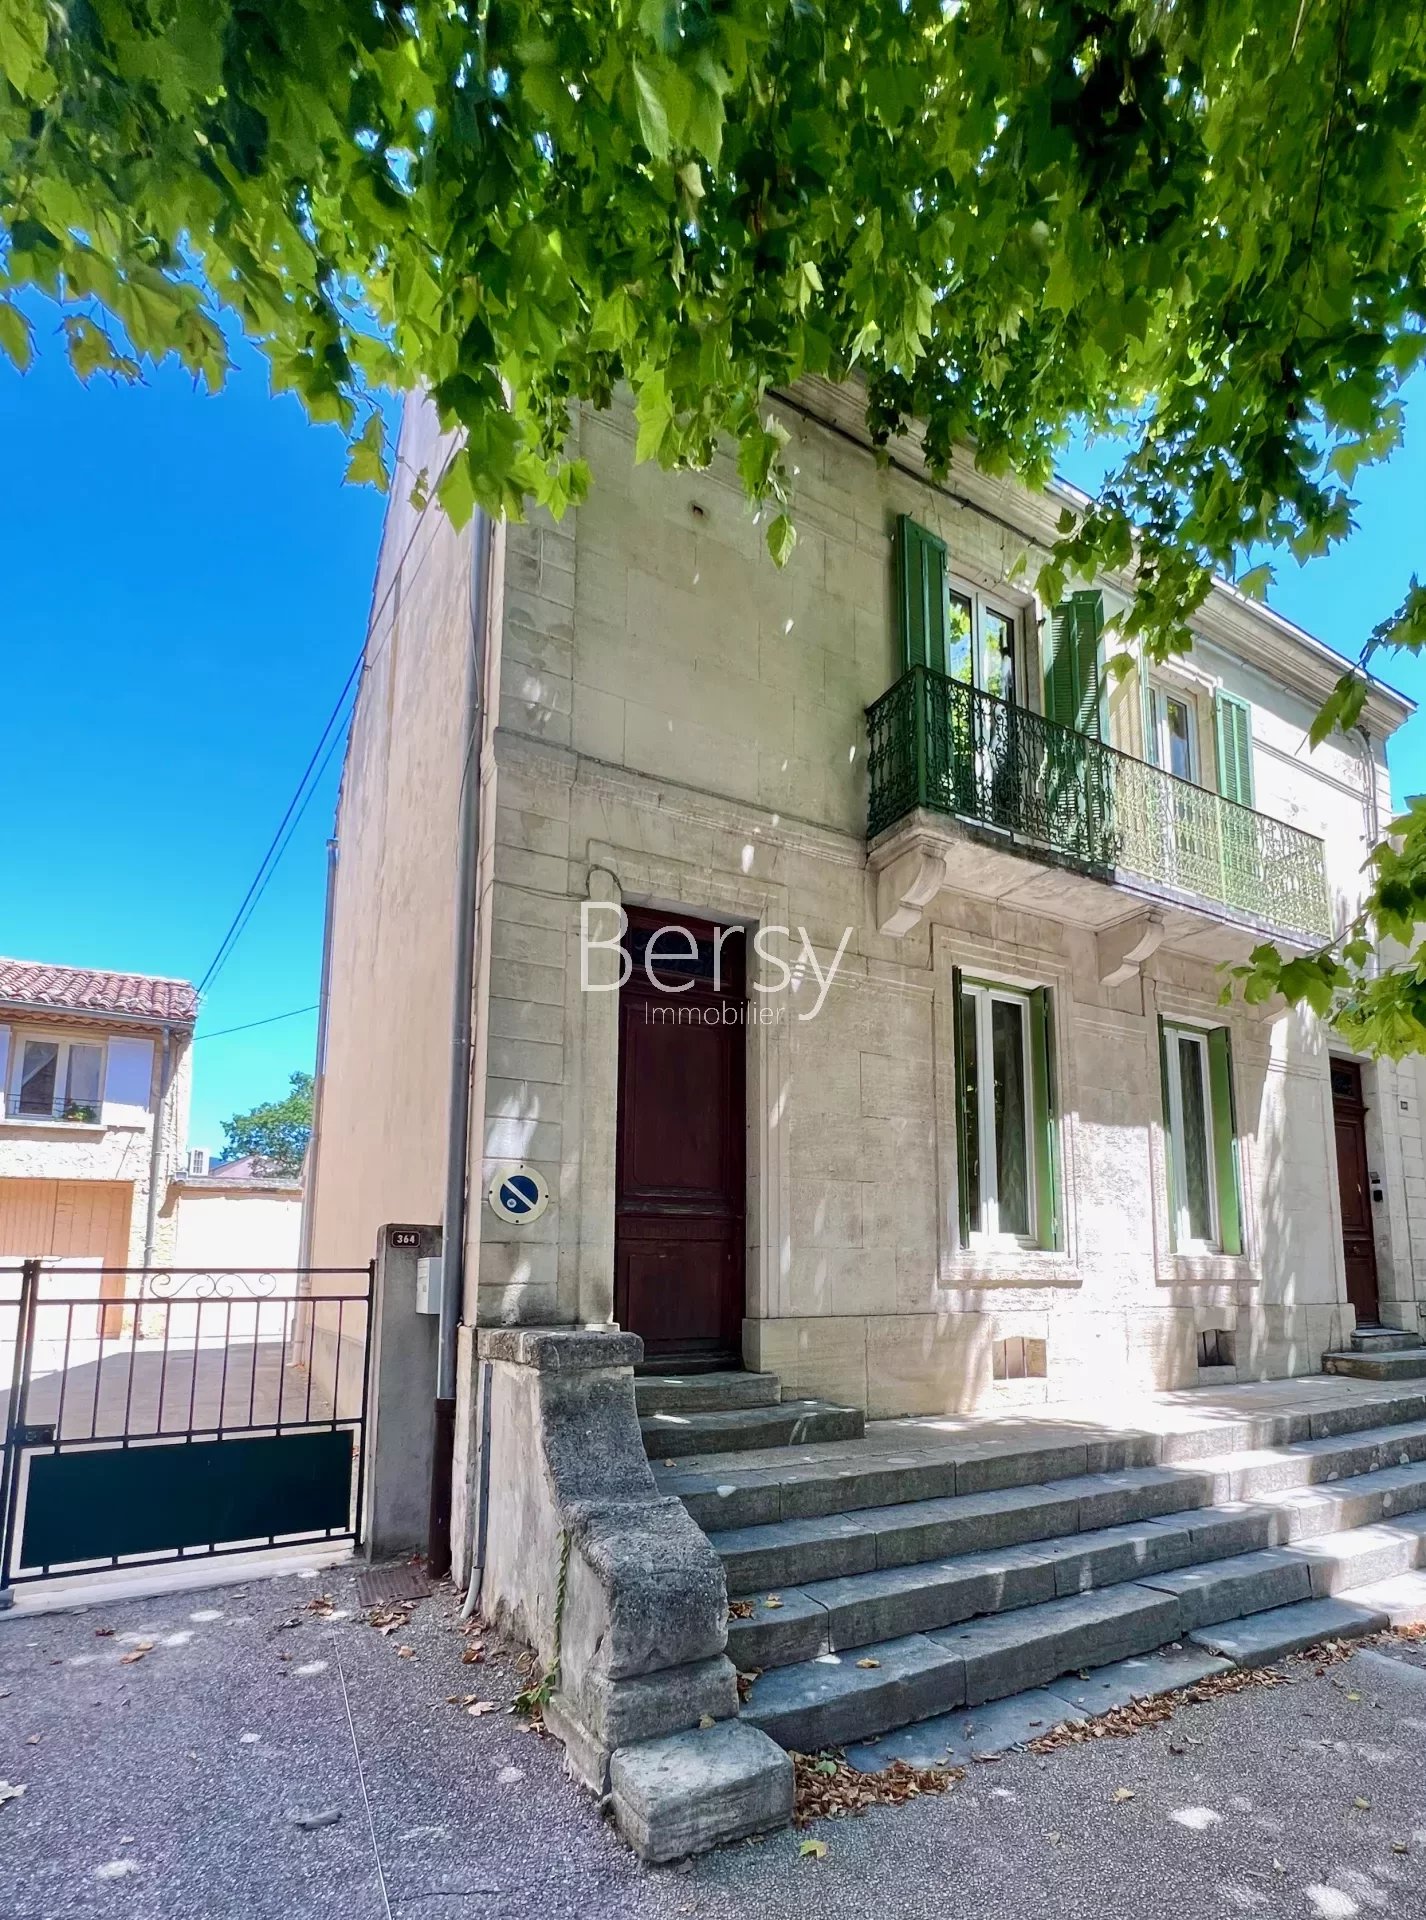 2 HOUSES and 3 GARAGES - GREAT OPPORTUNITY IN THE CENTER OF BEDOIN